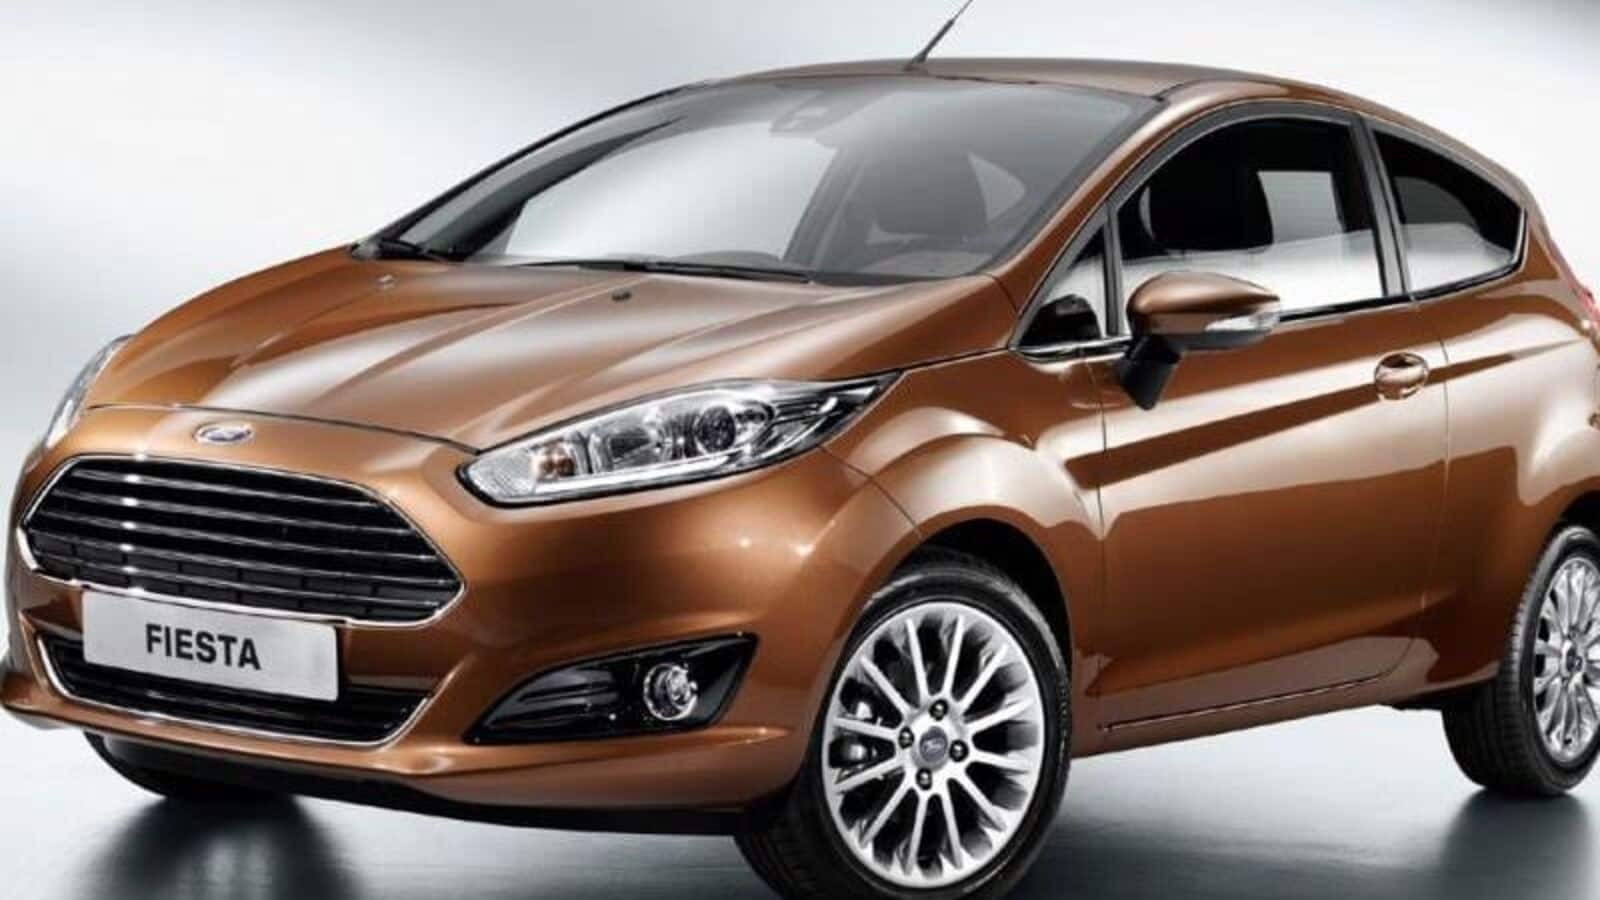 Hot-selling Ford Fiesta now drives into sunset amid EV dawn | HT Auto